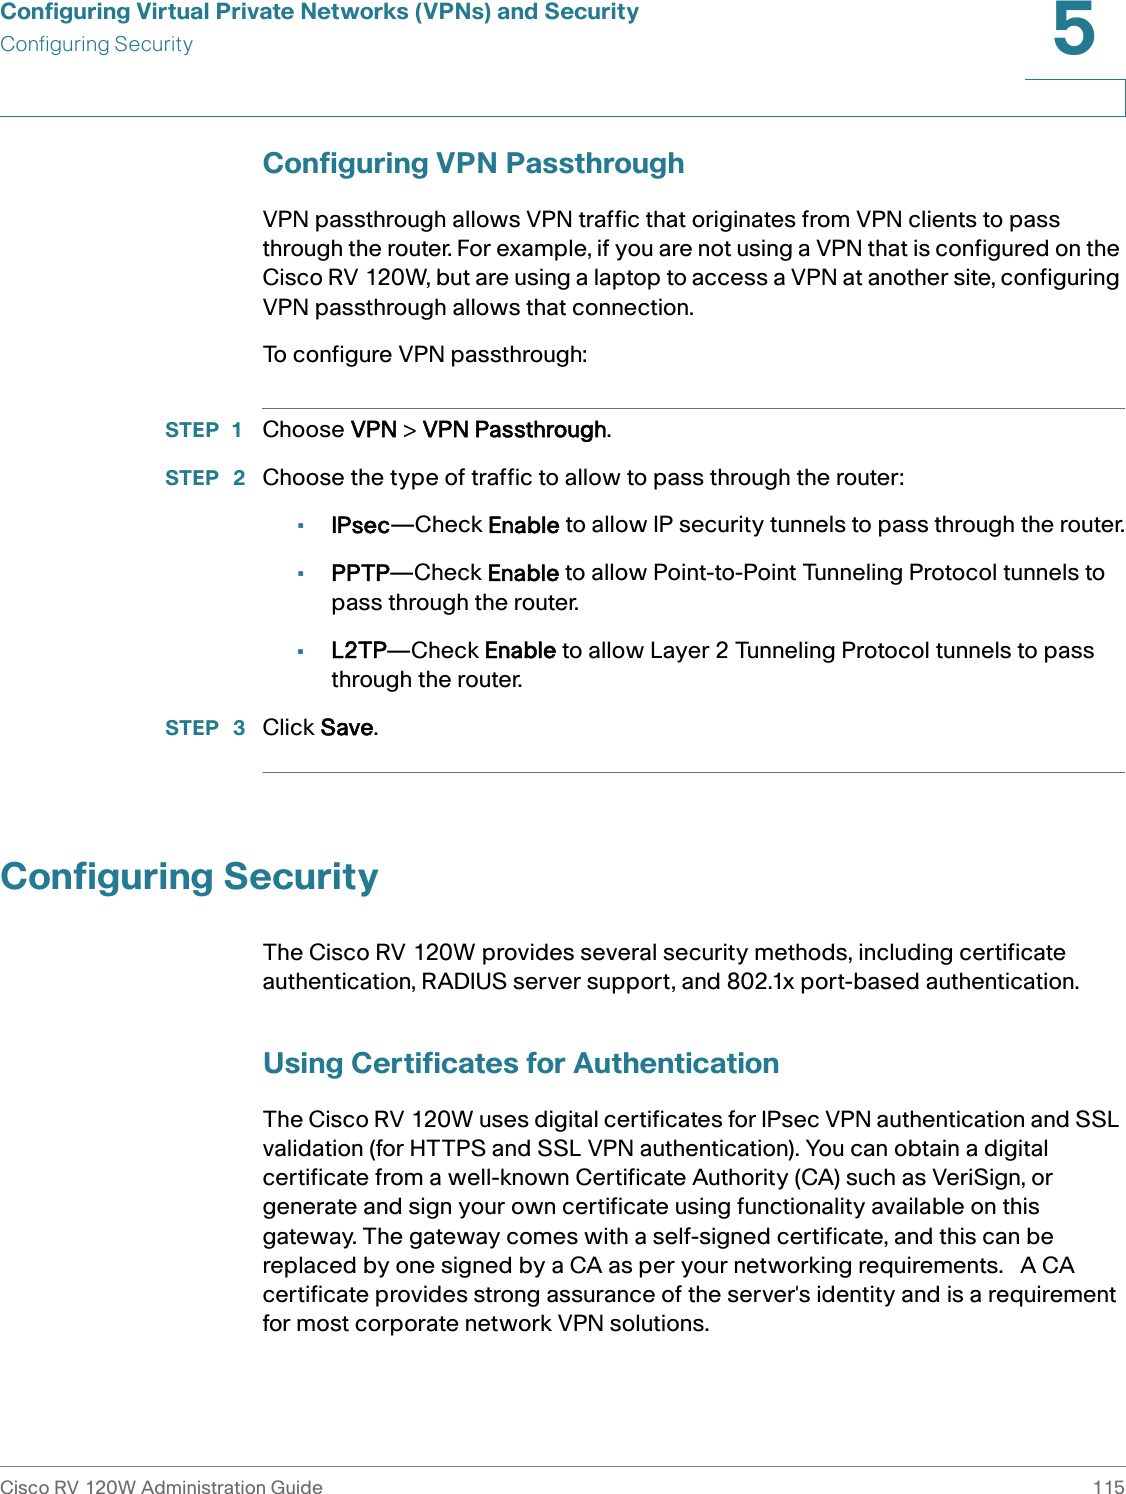 Configuring Virtual Private Networks (VPNs) and SecurityConfiguring SecurityCisco RV 120W Administration Guide 1155 Configuring VPN PassthroughVPN passthrough allows VPN traffic that originates from VPN clients to pass through the router. For example, if you are not using a VPN that is configured on the Cisco RV 120W, but are using a laptop to access a VPN at another site, configuring VPN passthrough allows that connection.To configure VPN passthrough:STEP 1 Choose VPN &gt; VPN Passthrough.STEP  2 Choose the type of traffic to allow to pass through the router:•IPsec—Check Enable to allow IP security tunnels to pass through the router.•PPTP—Check Enable to allow Point-to-Point Tunneling Protocol tunnels to pass through the router.•L2TP—Check Enable to allow Layer 2 Tunneling Protocol tunnels to pass through the router.STEP  3 Click Save.Configuring SecurityThe Cisco RV 120W provides several security methods, including certificate authentication, RADIUS server support, and 802.1x port-based authentication.Using Certificates for AuthenticationThe Cisco RV 120W uses digital certificates for IPsec VPN authentication and SSL validation (for HTTPS and SSL VPN authentication). You can obtain a digital certificate from a well-known Certificate Authority (CA) such as VeriSign, or generate and sign your own certificate using functionality available on this gateway. The gateway comes with a self-signed certificate, and this can be replaced by one signed by a CA as per your networking requirements.   A CA certificate provides strong assurance of the server&apos;s identity and is a requirement for most corporate network VPN solutions. 